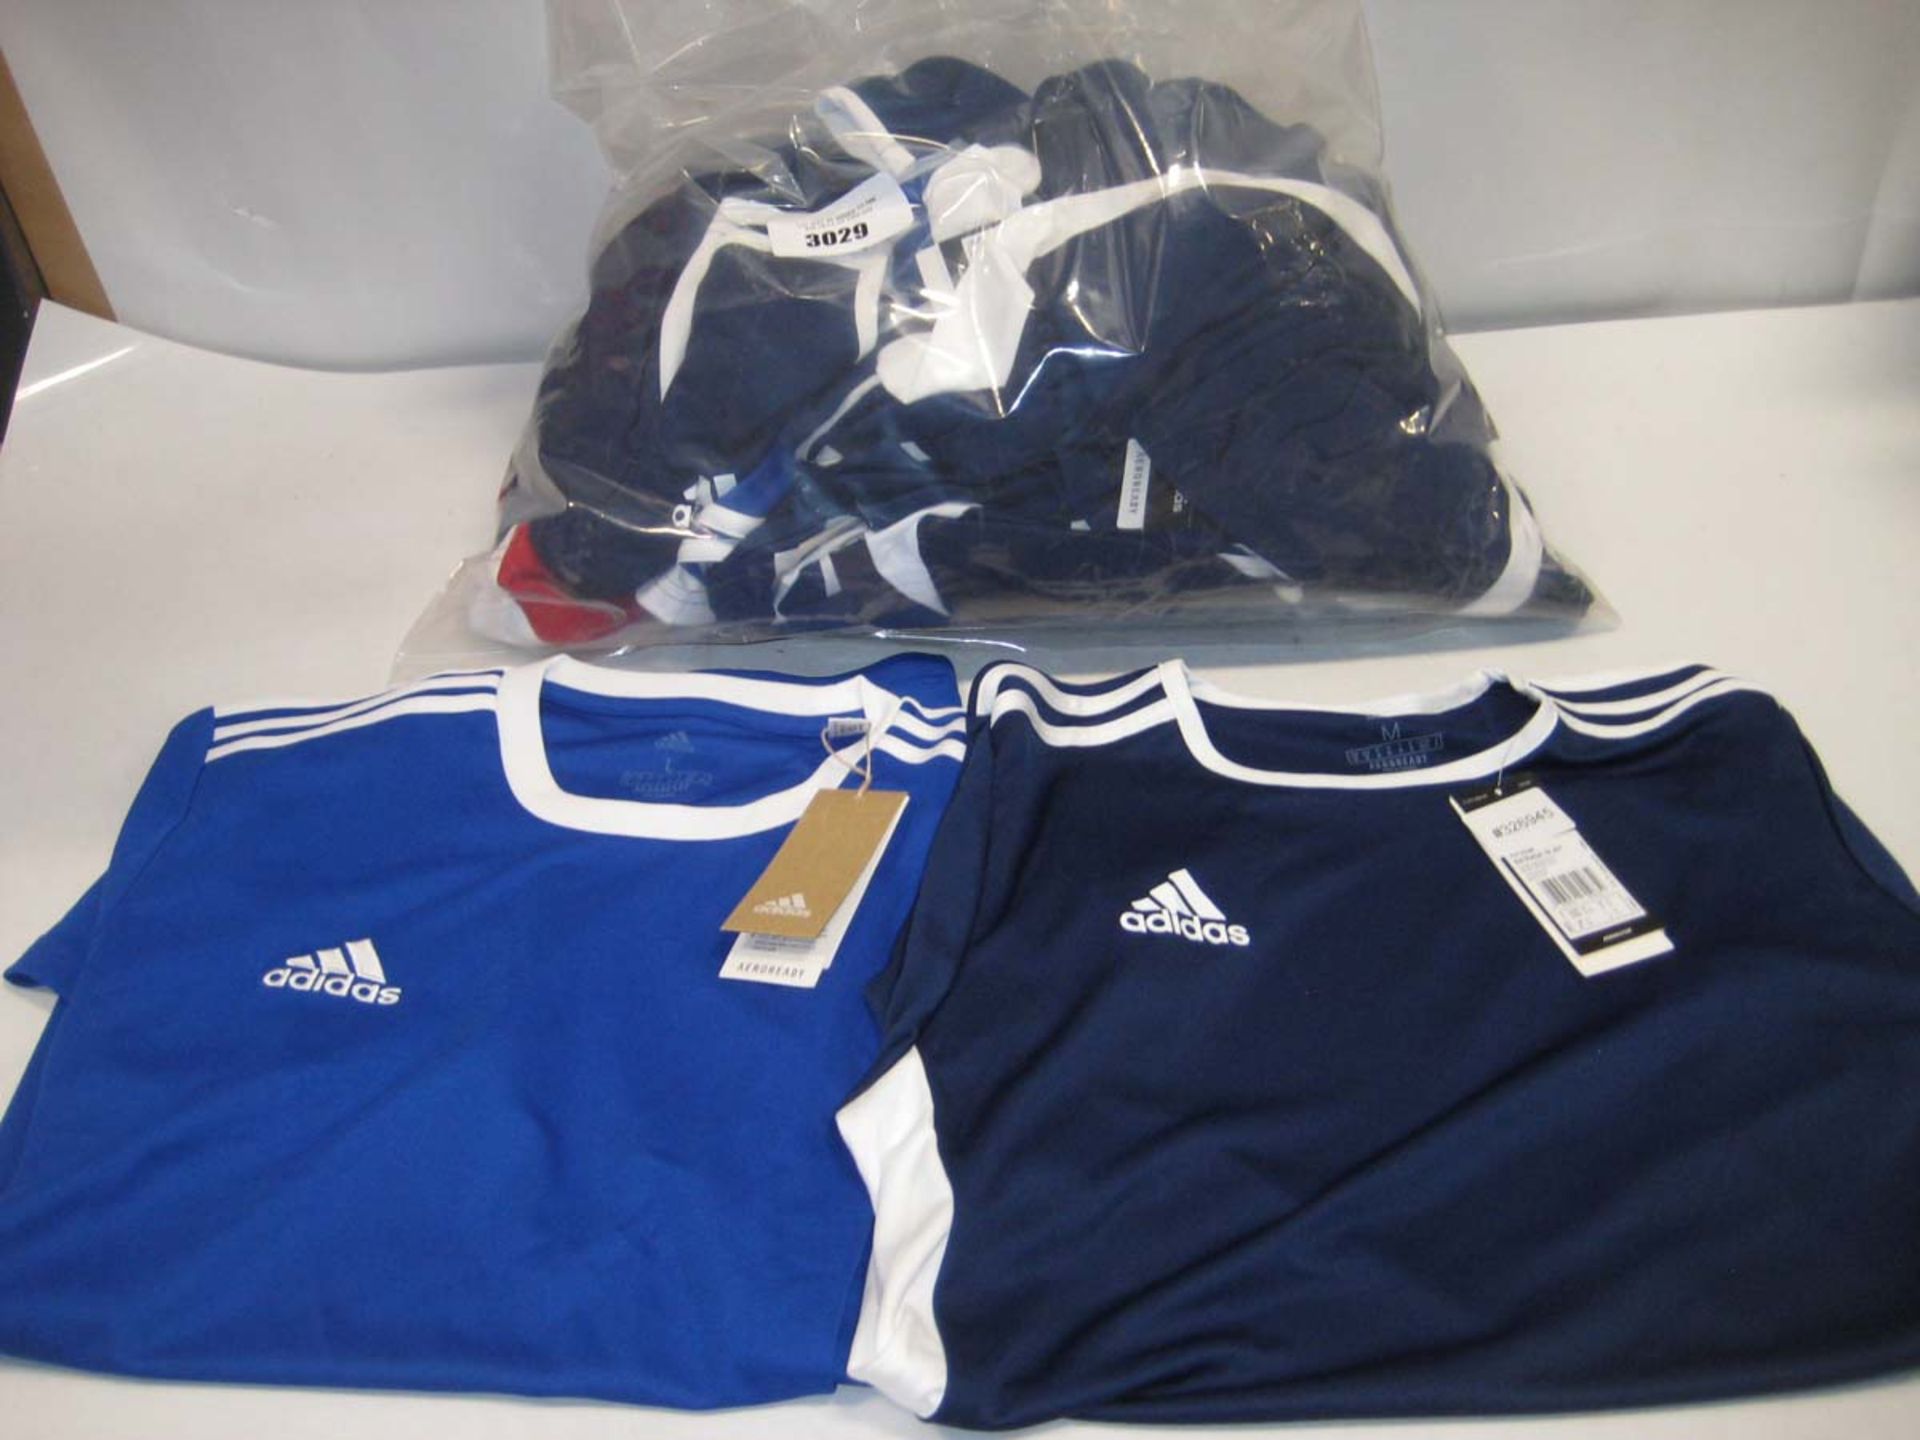 Bag containing approx. 20 Adidas tops in blue and one in red